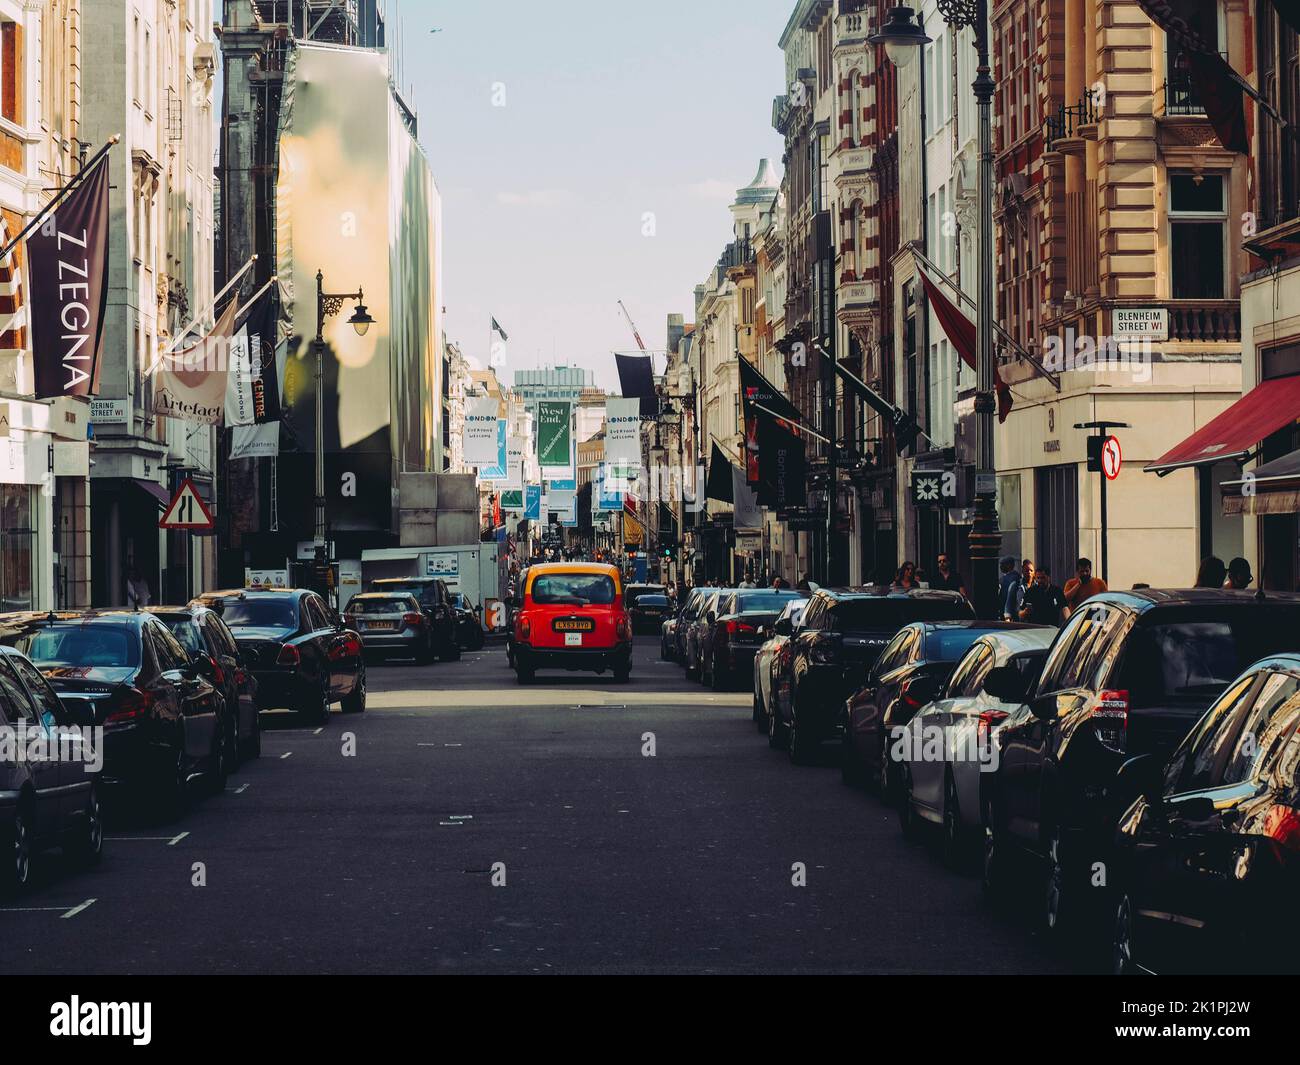 A beautiful shot of cars in traffic in the streets of London Stock Photo